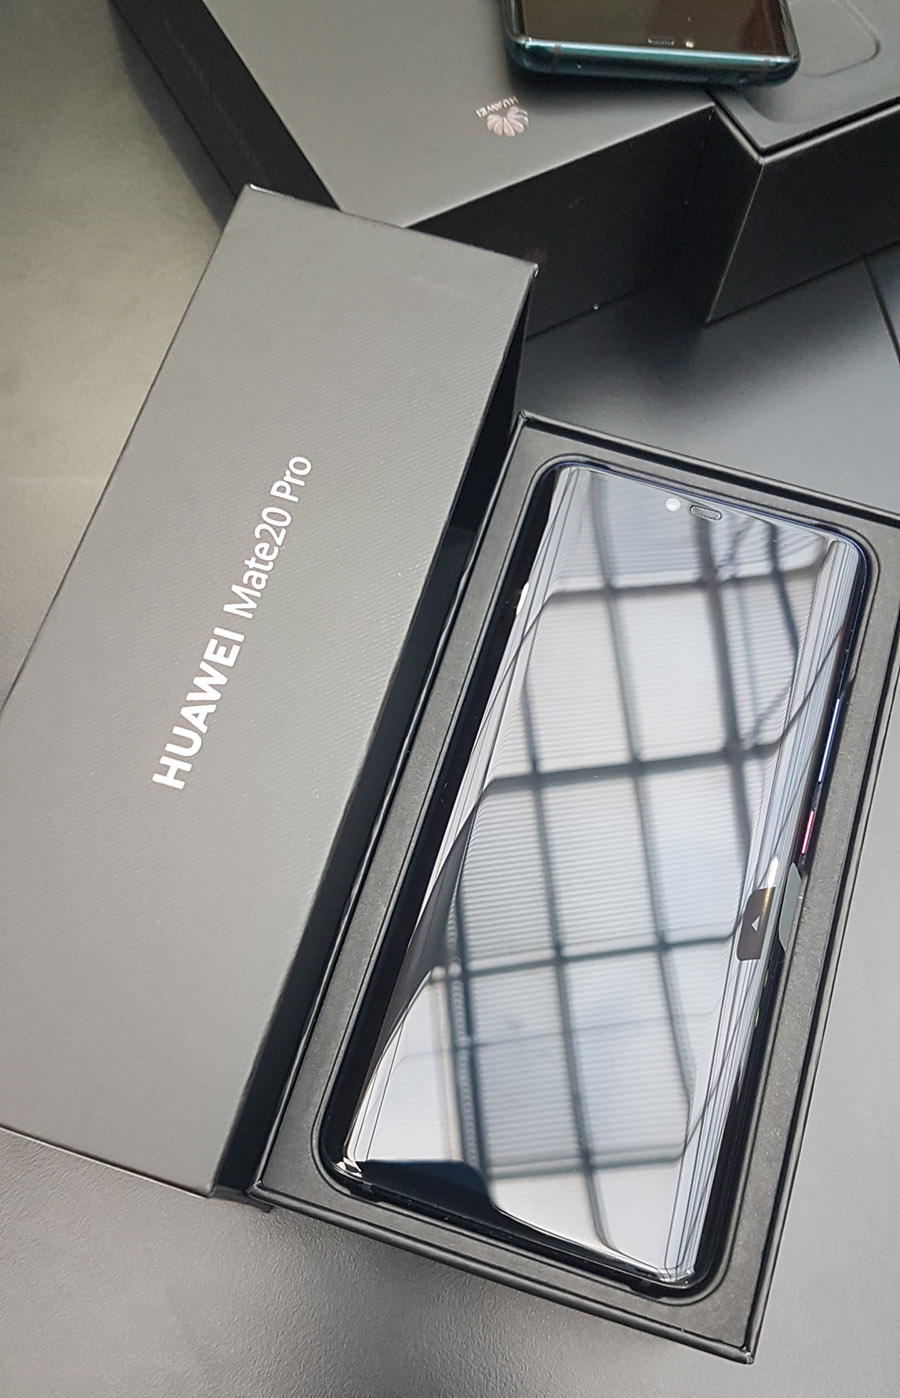 Huawei Mate 20 Pro Unboxed